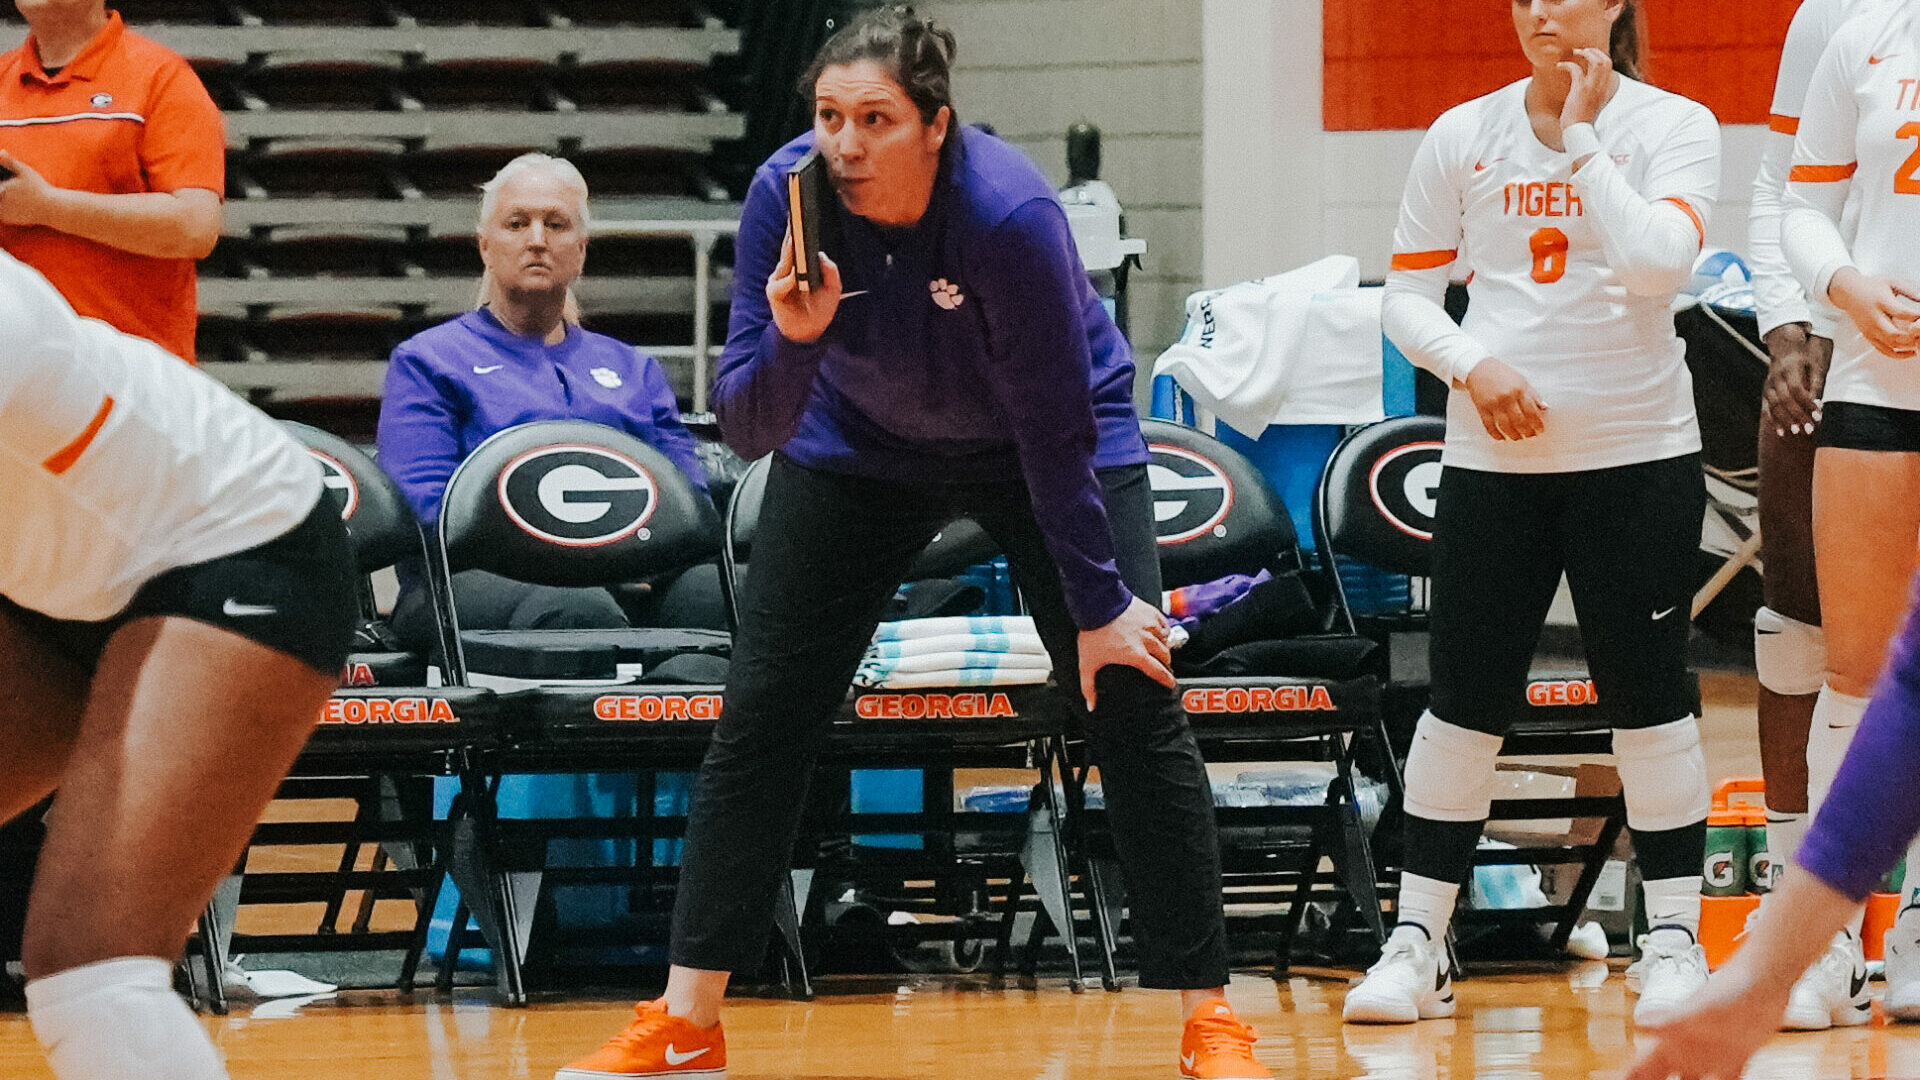 Clemson volleyball coach shouting coaching orders to players